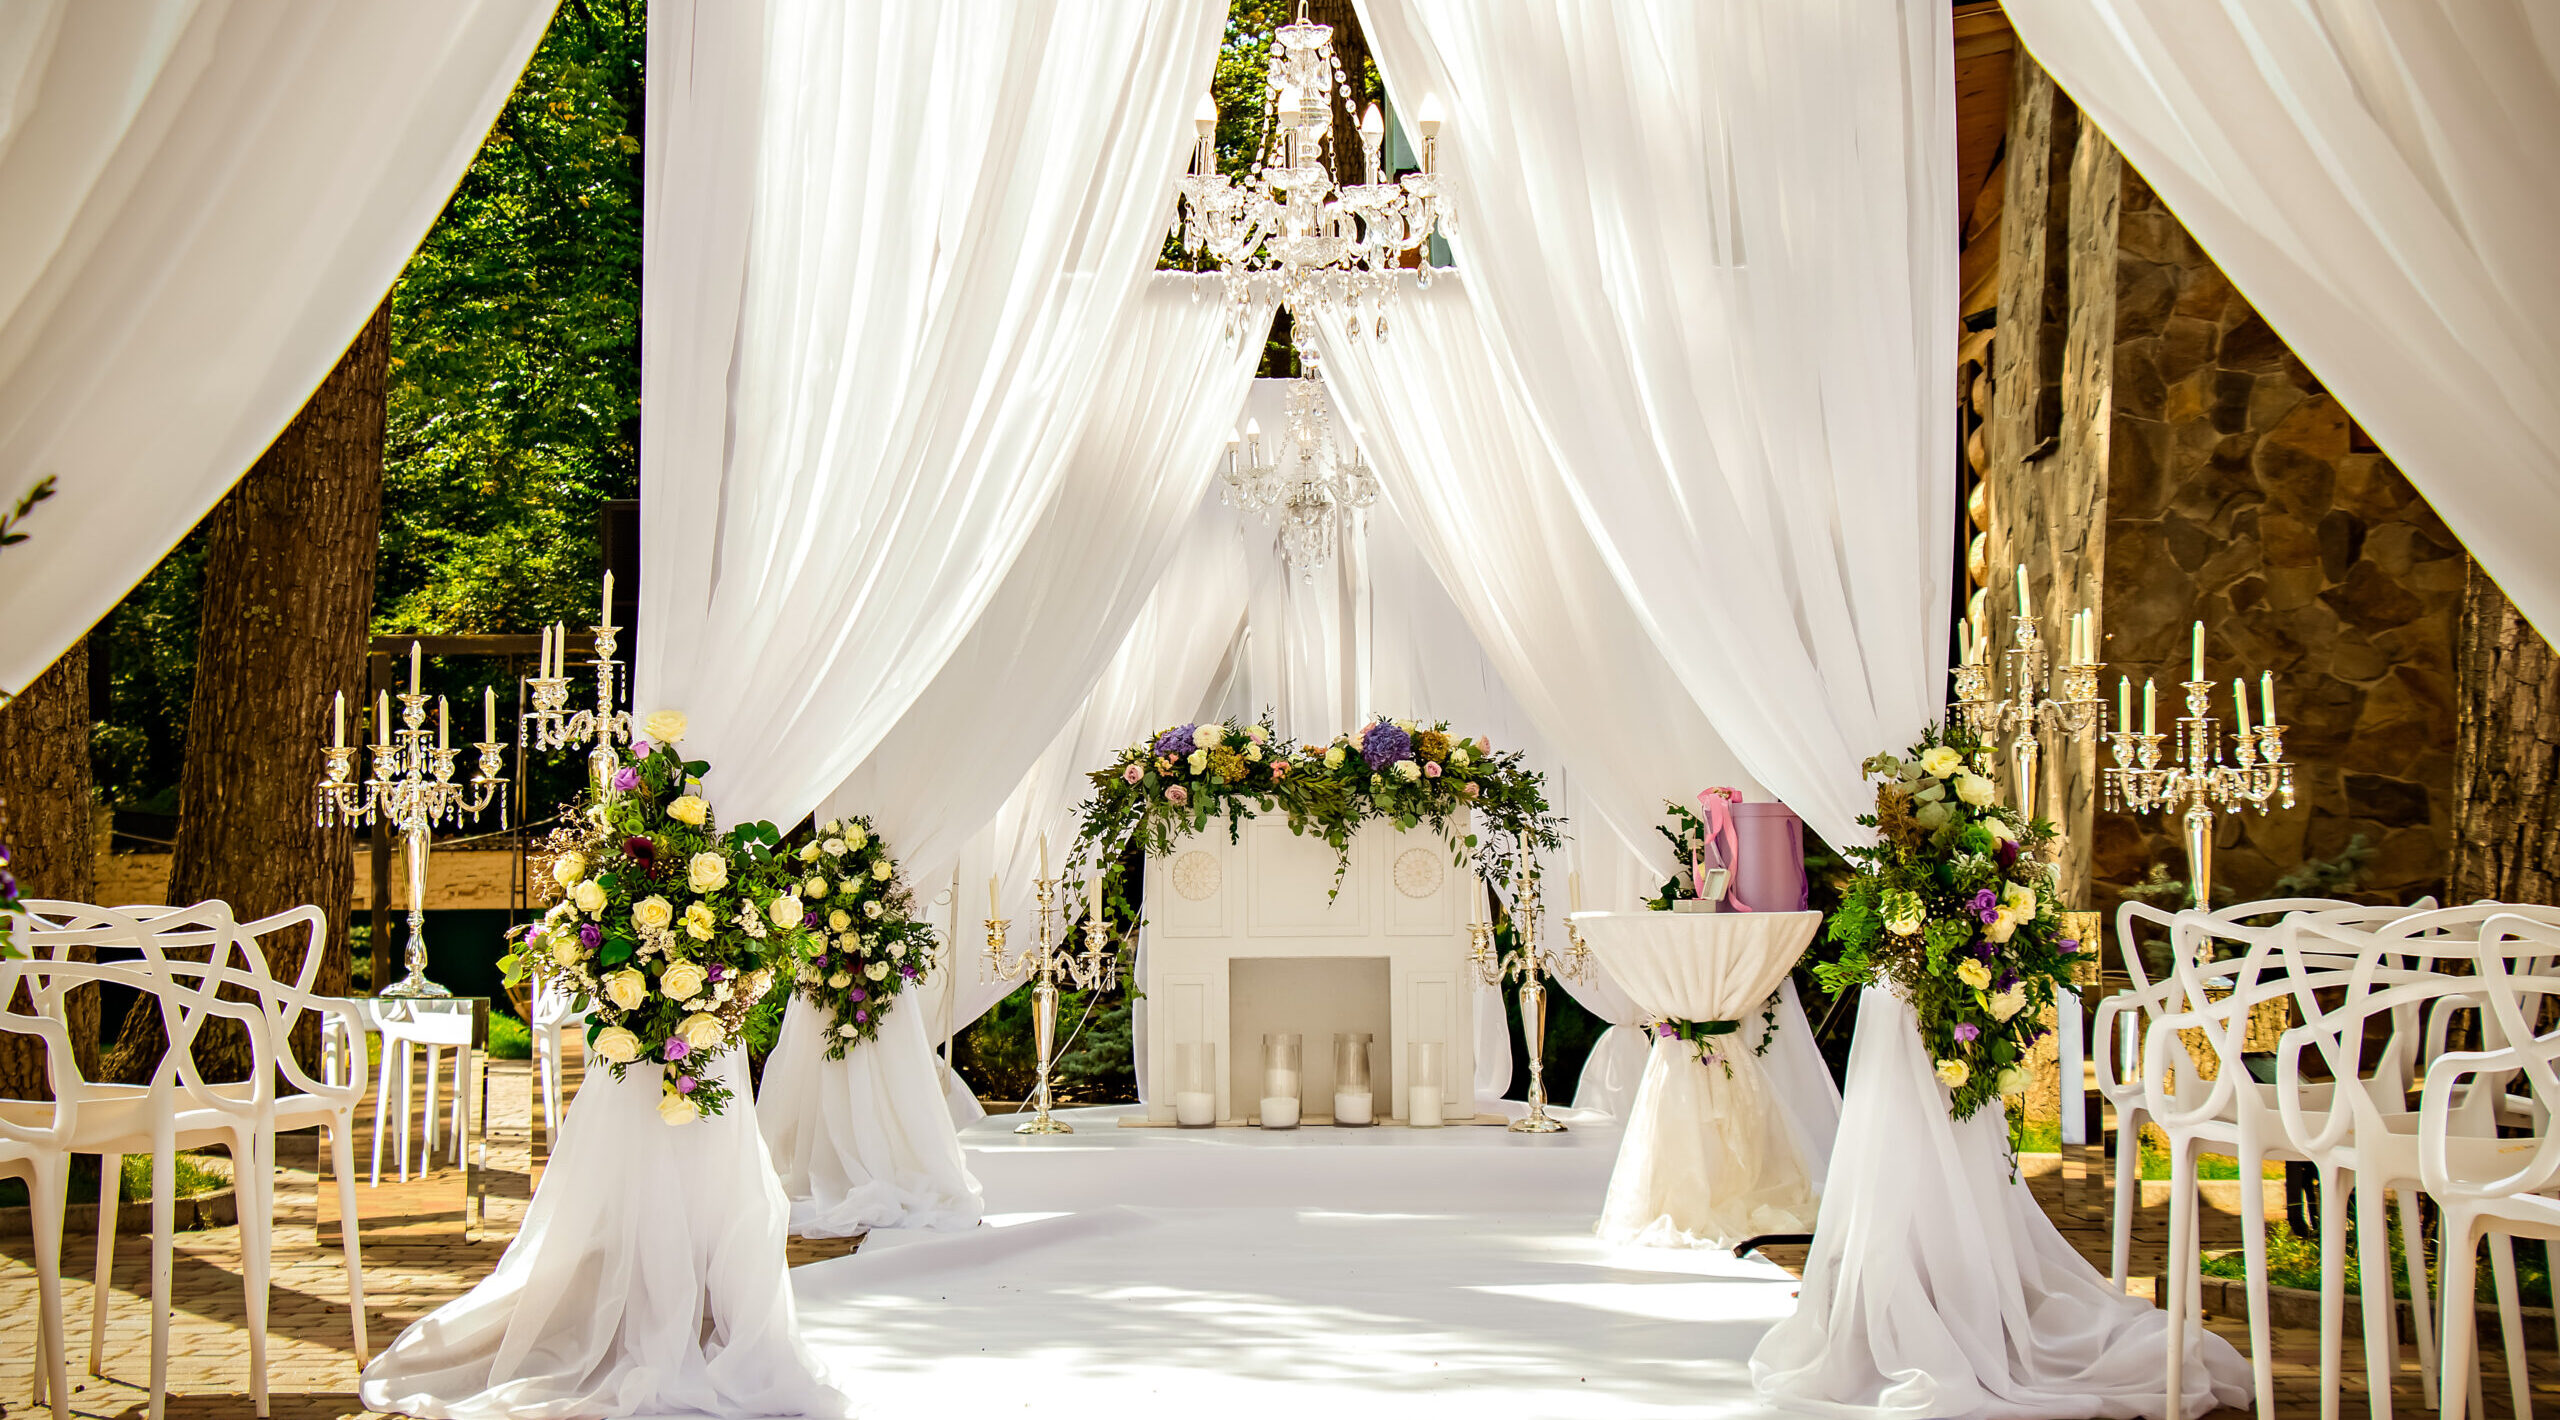 Place,For,Wedding,Ceremony,In,White,Color,,with,White,Fireplace